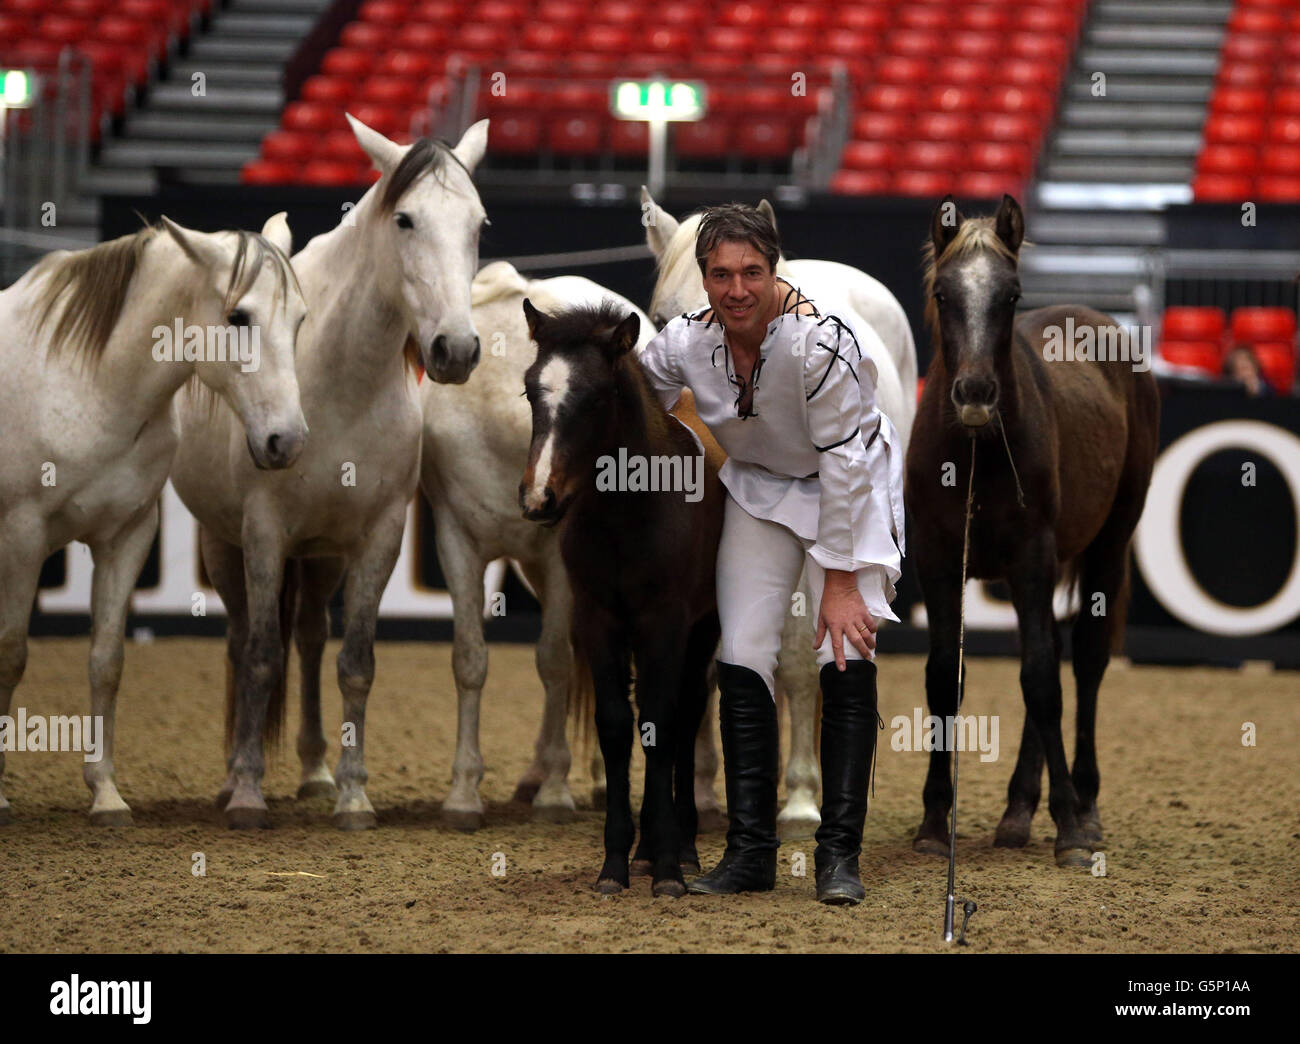 Jean-Francois Pignon kicks off celebrating 40 years of world class equestrian sport with a display of his horsemanship during day one of The London International Horse Show at the London Olympia, London. Stock Photo